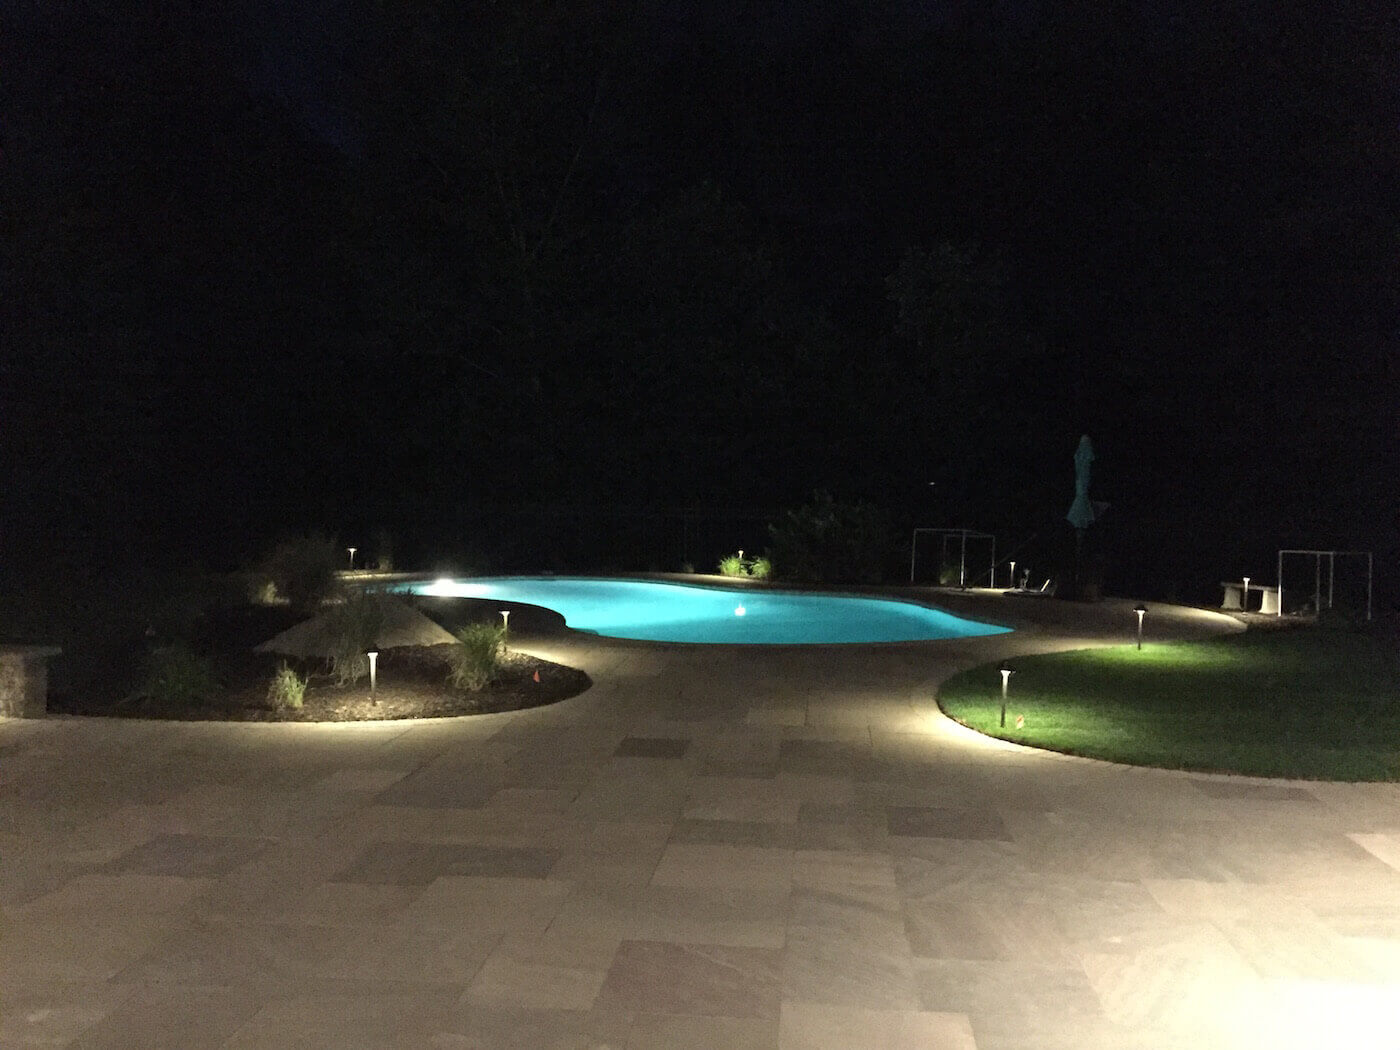 Pool with patio and pathway lighting